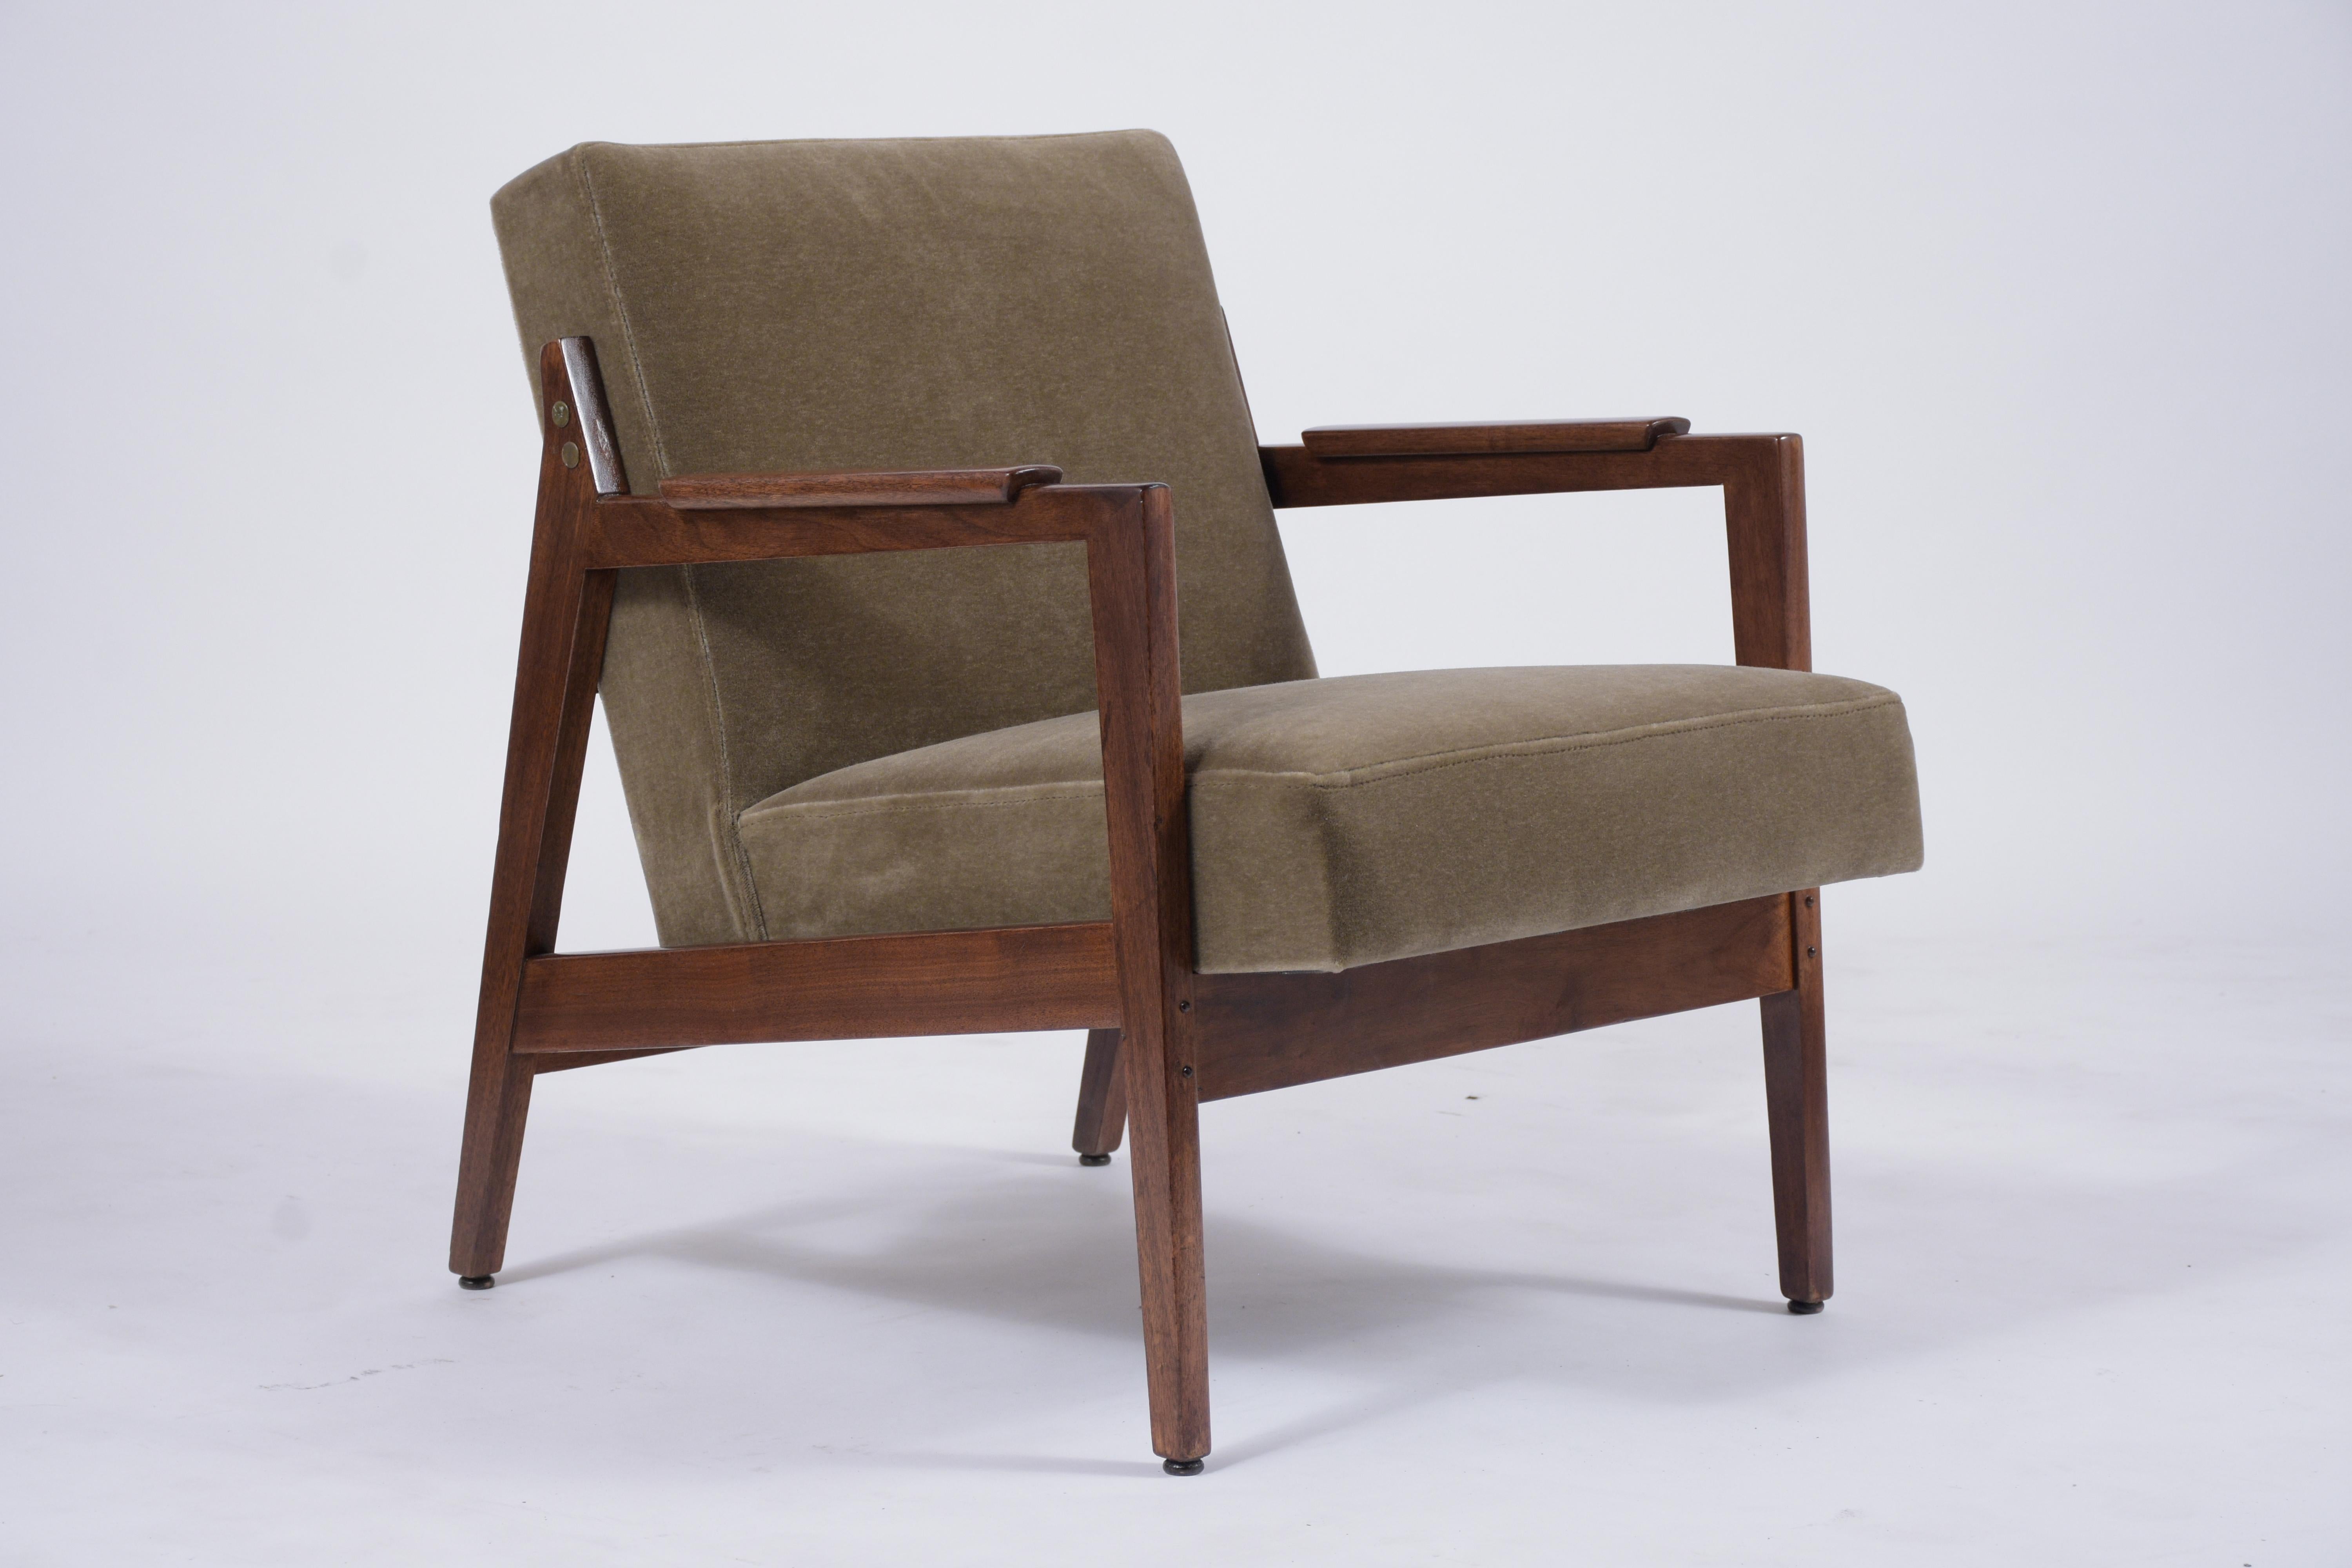 Carved 1960's Pair of Mid-Century Modern Walnut Lounge Chairs